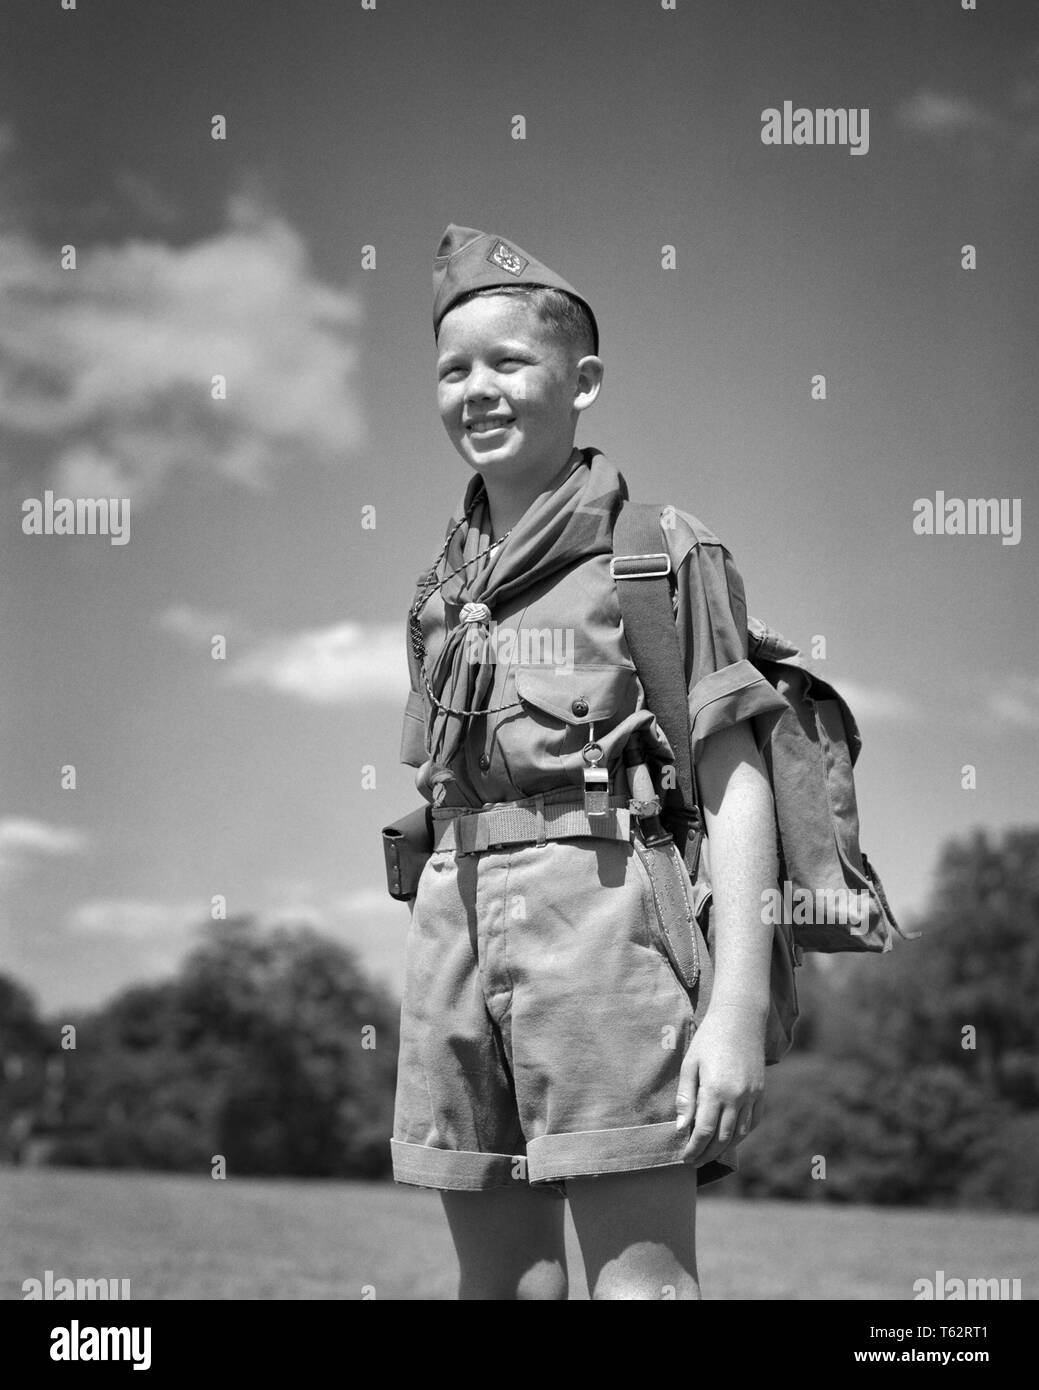 1950s SMILING YOUNG TEENAGE BOY SCOUT STANDING AT ATTENTION WEARING UNIFORM CAP SHIRT NECKERCHIEF SHORTS PACK WHISTLE OUTDOORS - b6044 HAR001 HARS JUVENILE FACIAL STYLE SAFETY PLEASED JOY LIFESTYLE SATISFACTION SCOUT PACK RURAL HEALTHINESS COPY SPACE HALF-LENGTH PERSONS INSPIRATION SCOUTS MALES TEENAGE BOY EXPRESSIONS B&W SUCCESS HAPPINESS CHEERFUL ADVENTURE STRENGTH COURAGE ATTENTION CHOICE KNOWLEDGE LEADERSHIP RECREATION PRIDE NECKERCHIEF AT SMILES BOY SCOUT THRIFTY CONCEPTUAL COURTEOUS FRIENDLY HELPFUL JOYFUL KIND REVERENT STYLISH TEENAGED TRUSTWORTHY COOPERATION CREATIVITY GROWTH JUVENILES Stock Photo